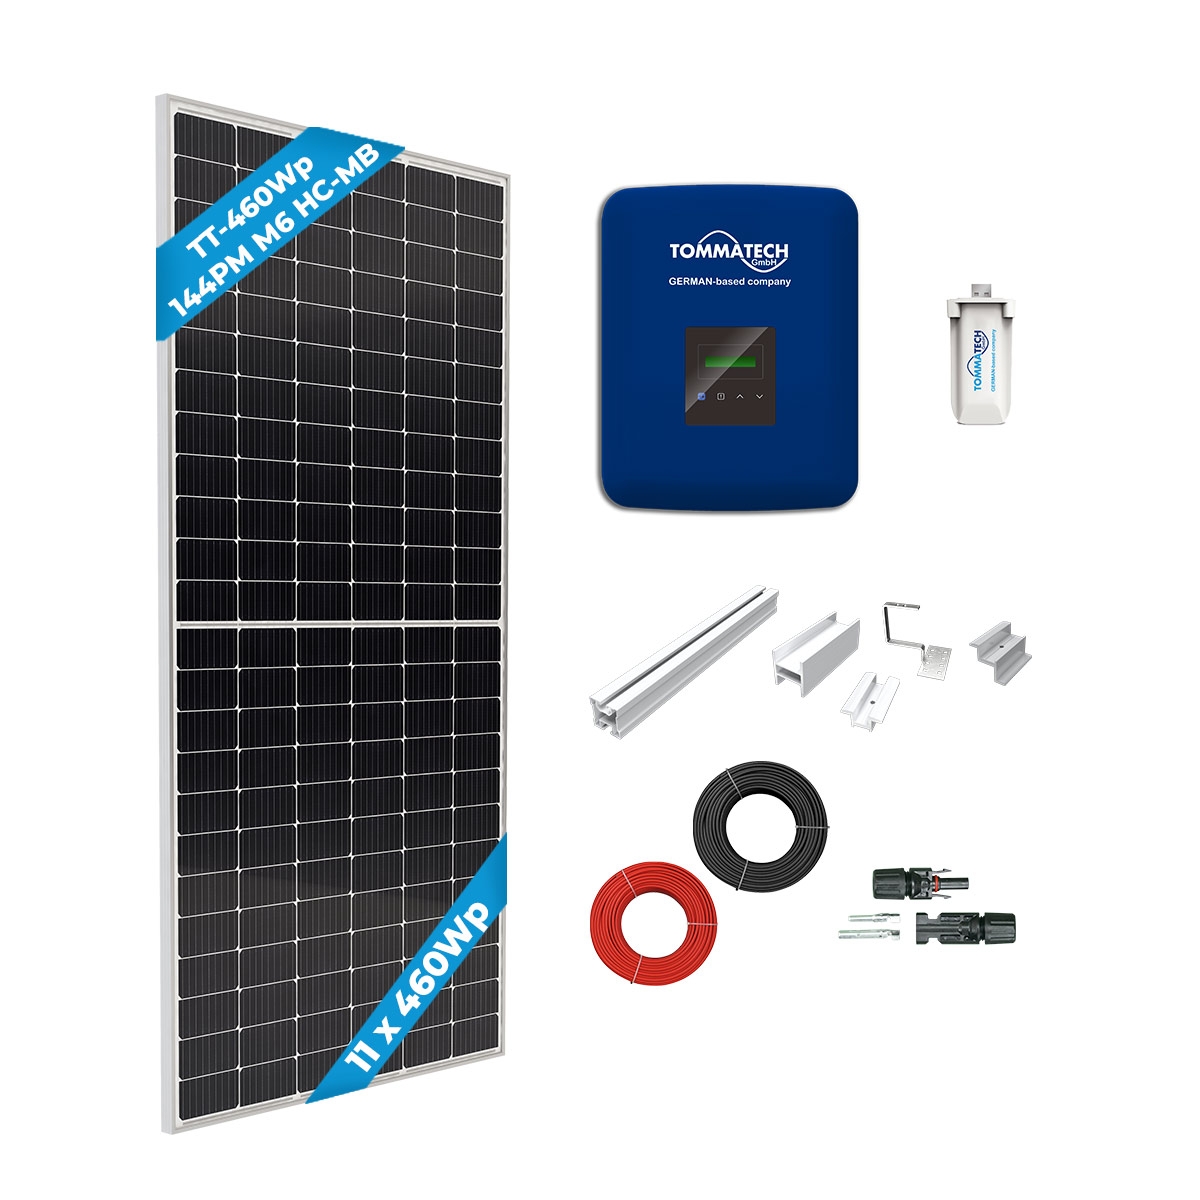 TommaTech 5kWe Tile Roof Single Phase On-Grid Solar Package